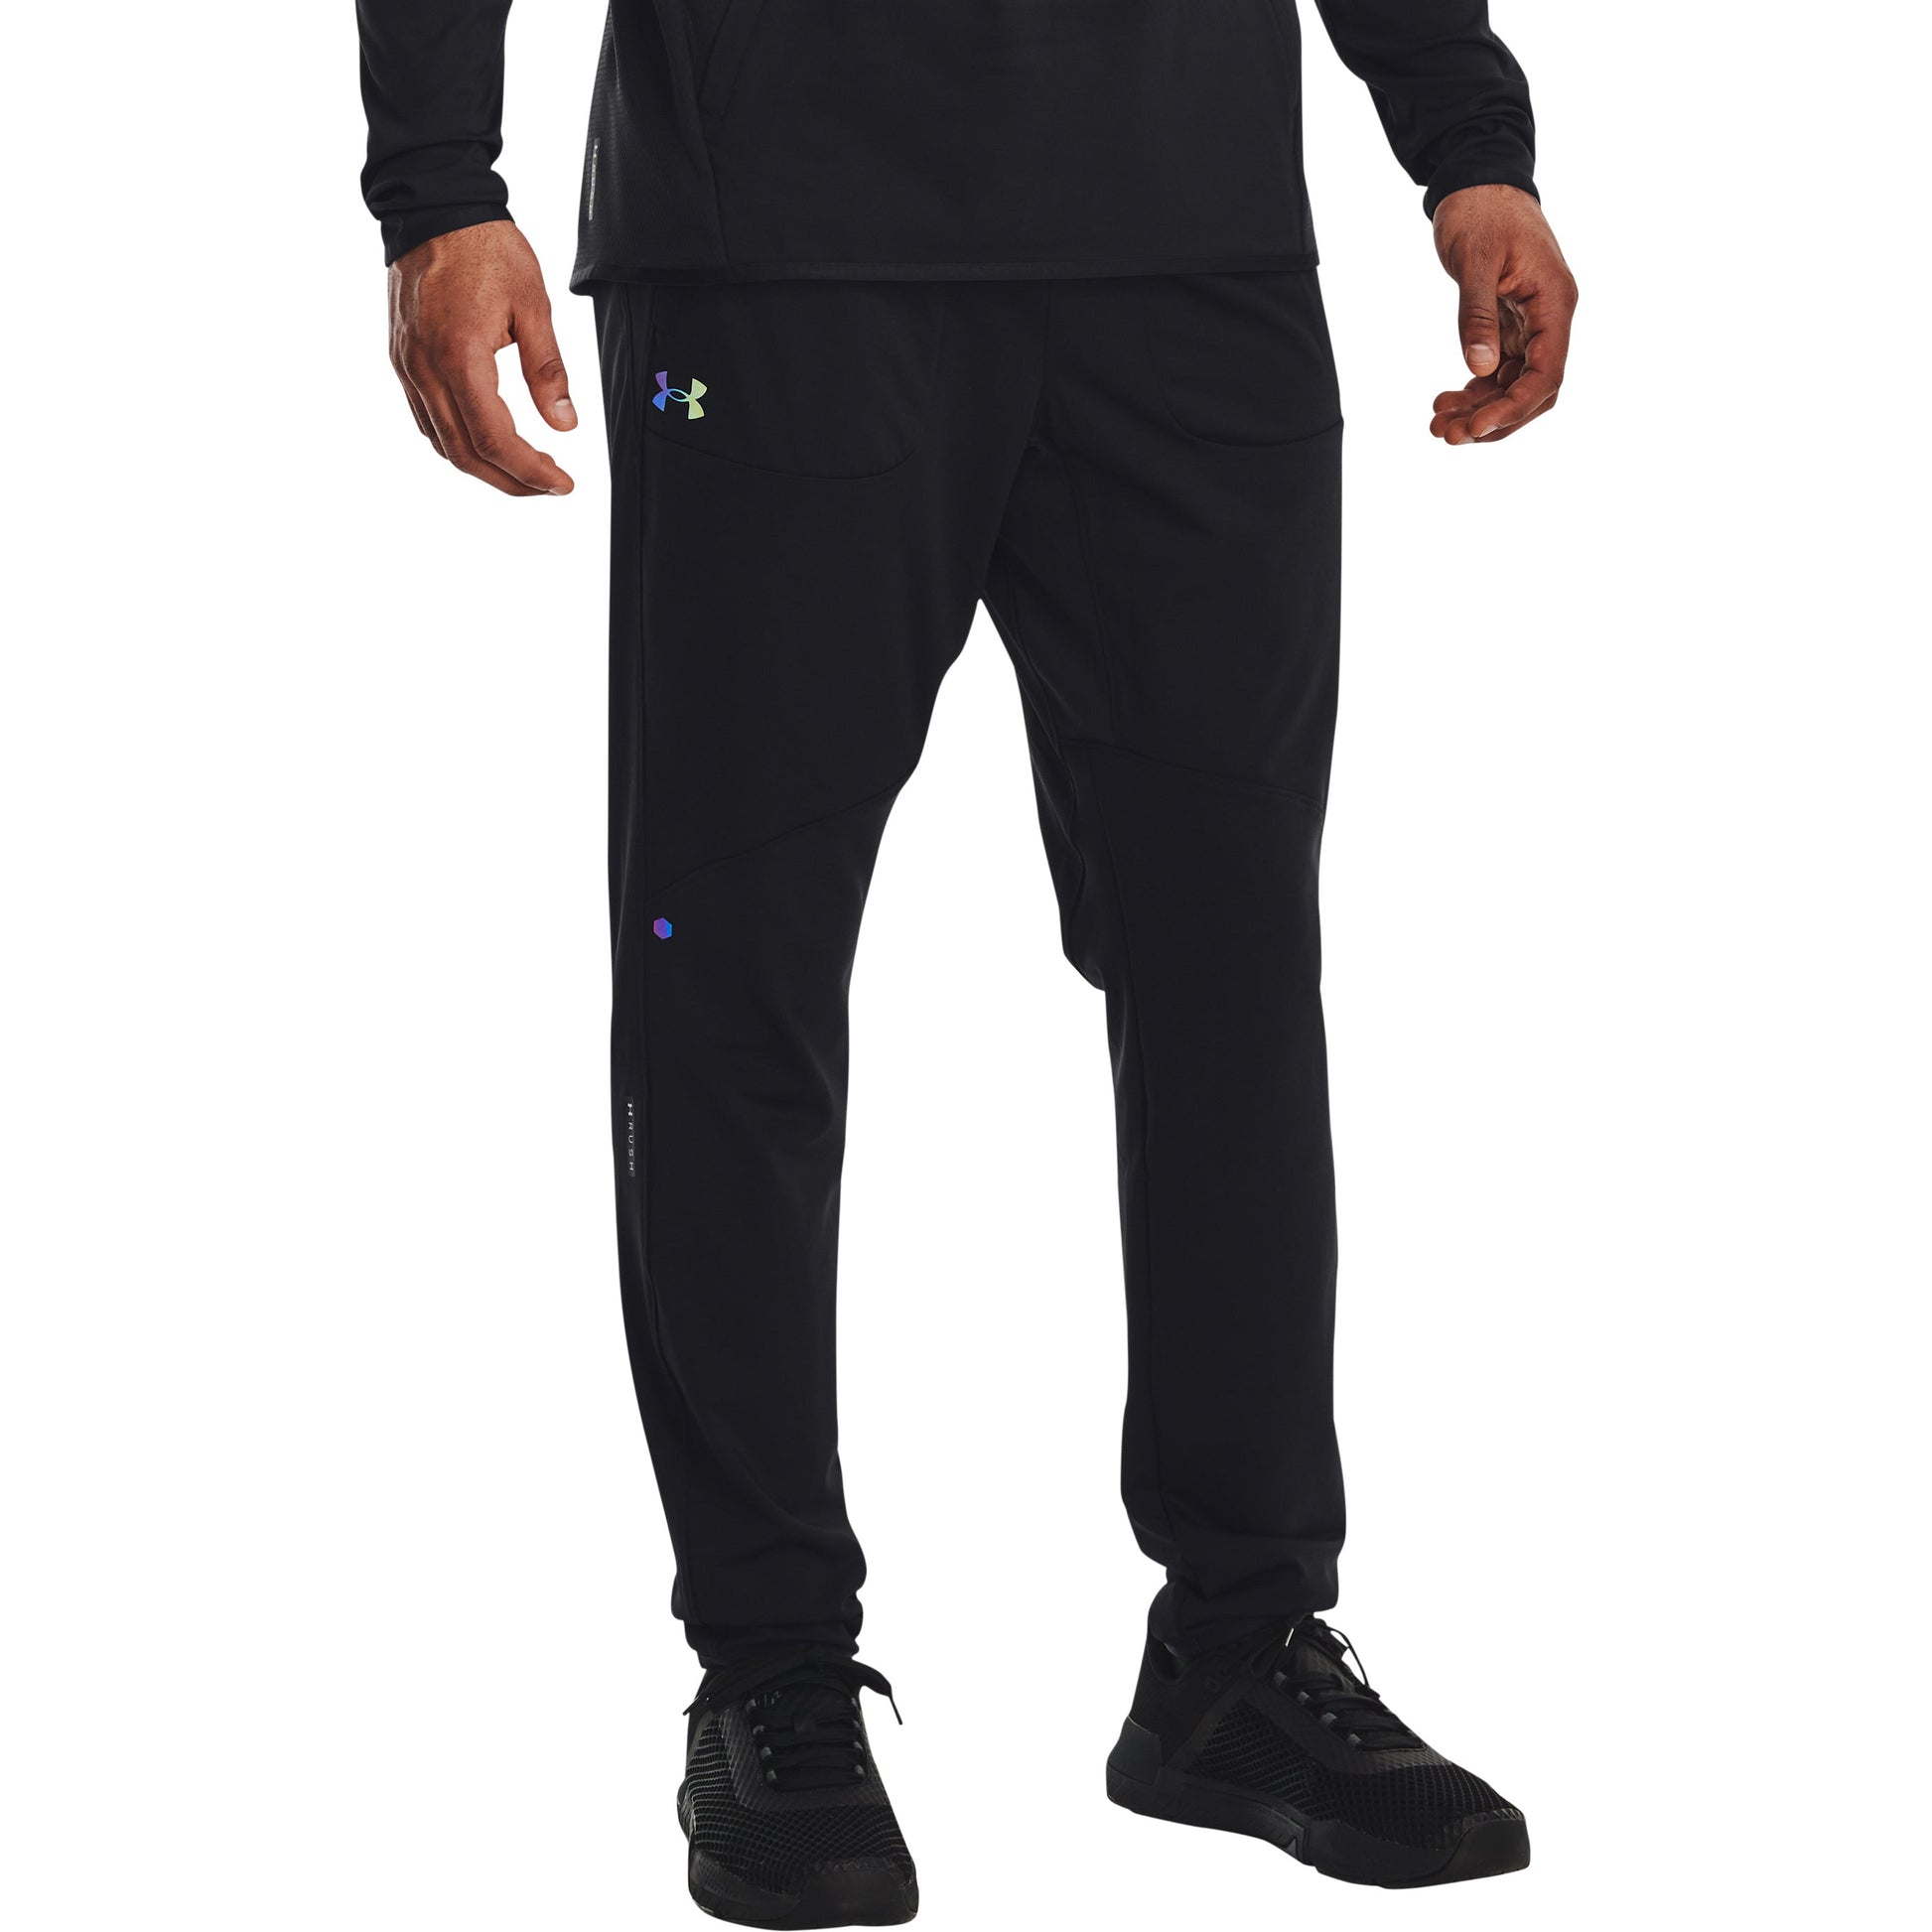 Under Armour Rush Warm Up Pants